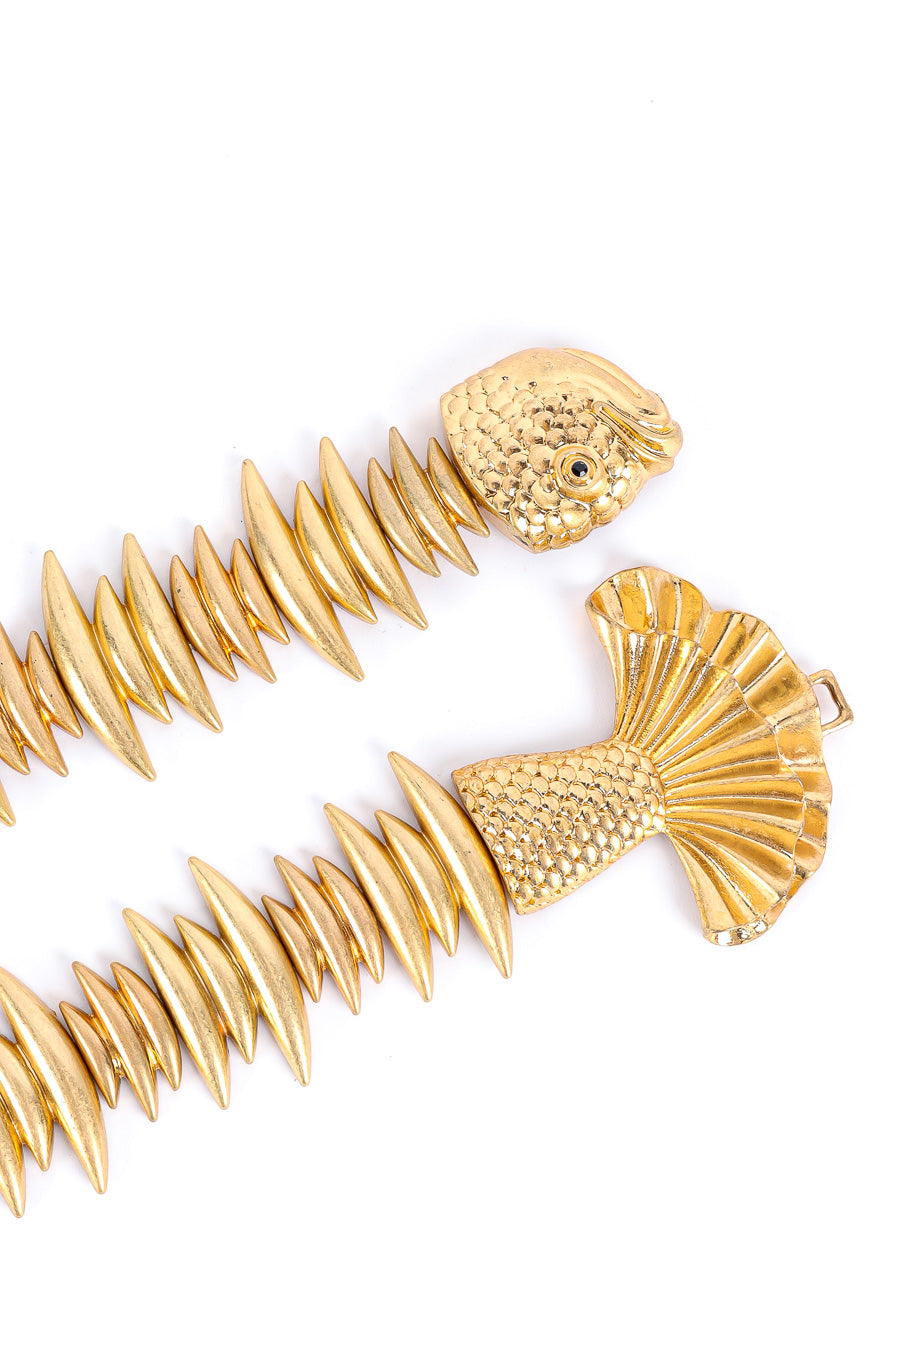 Gold metal fish spine vintage chain belt tail and head close @recessla